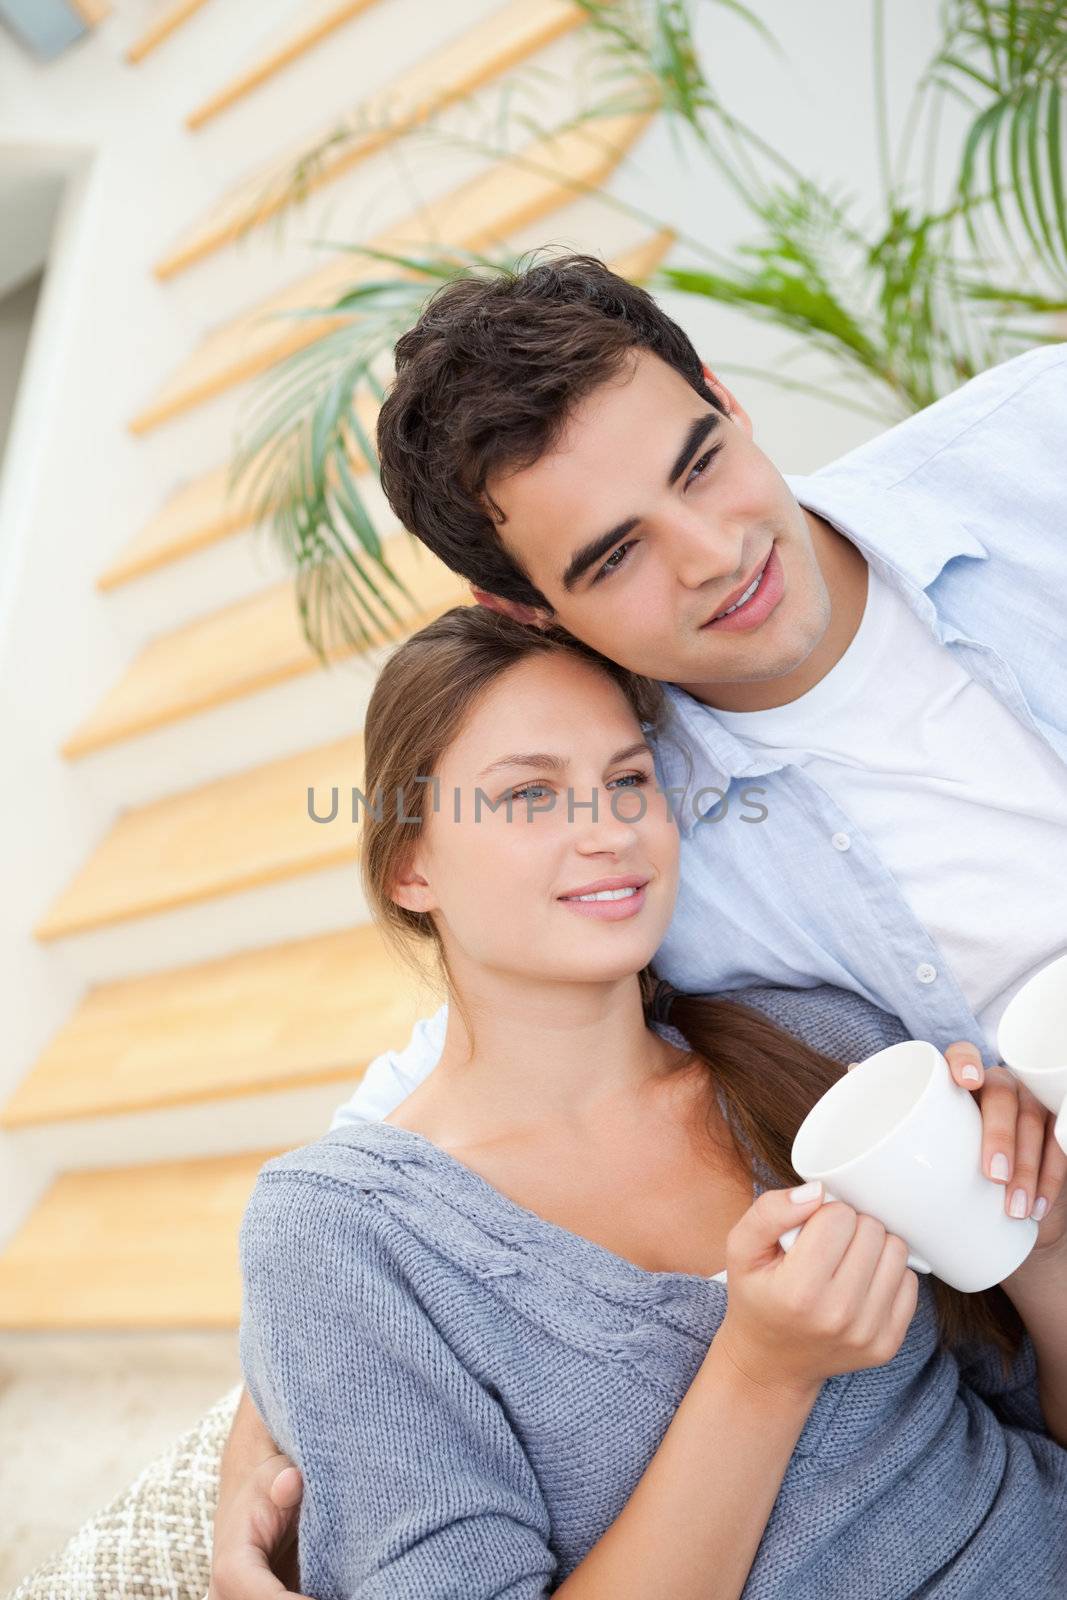 Young Couple smiling while embracing each other indoors